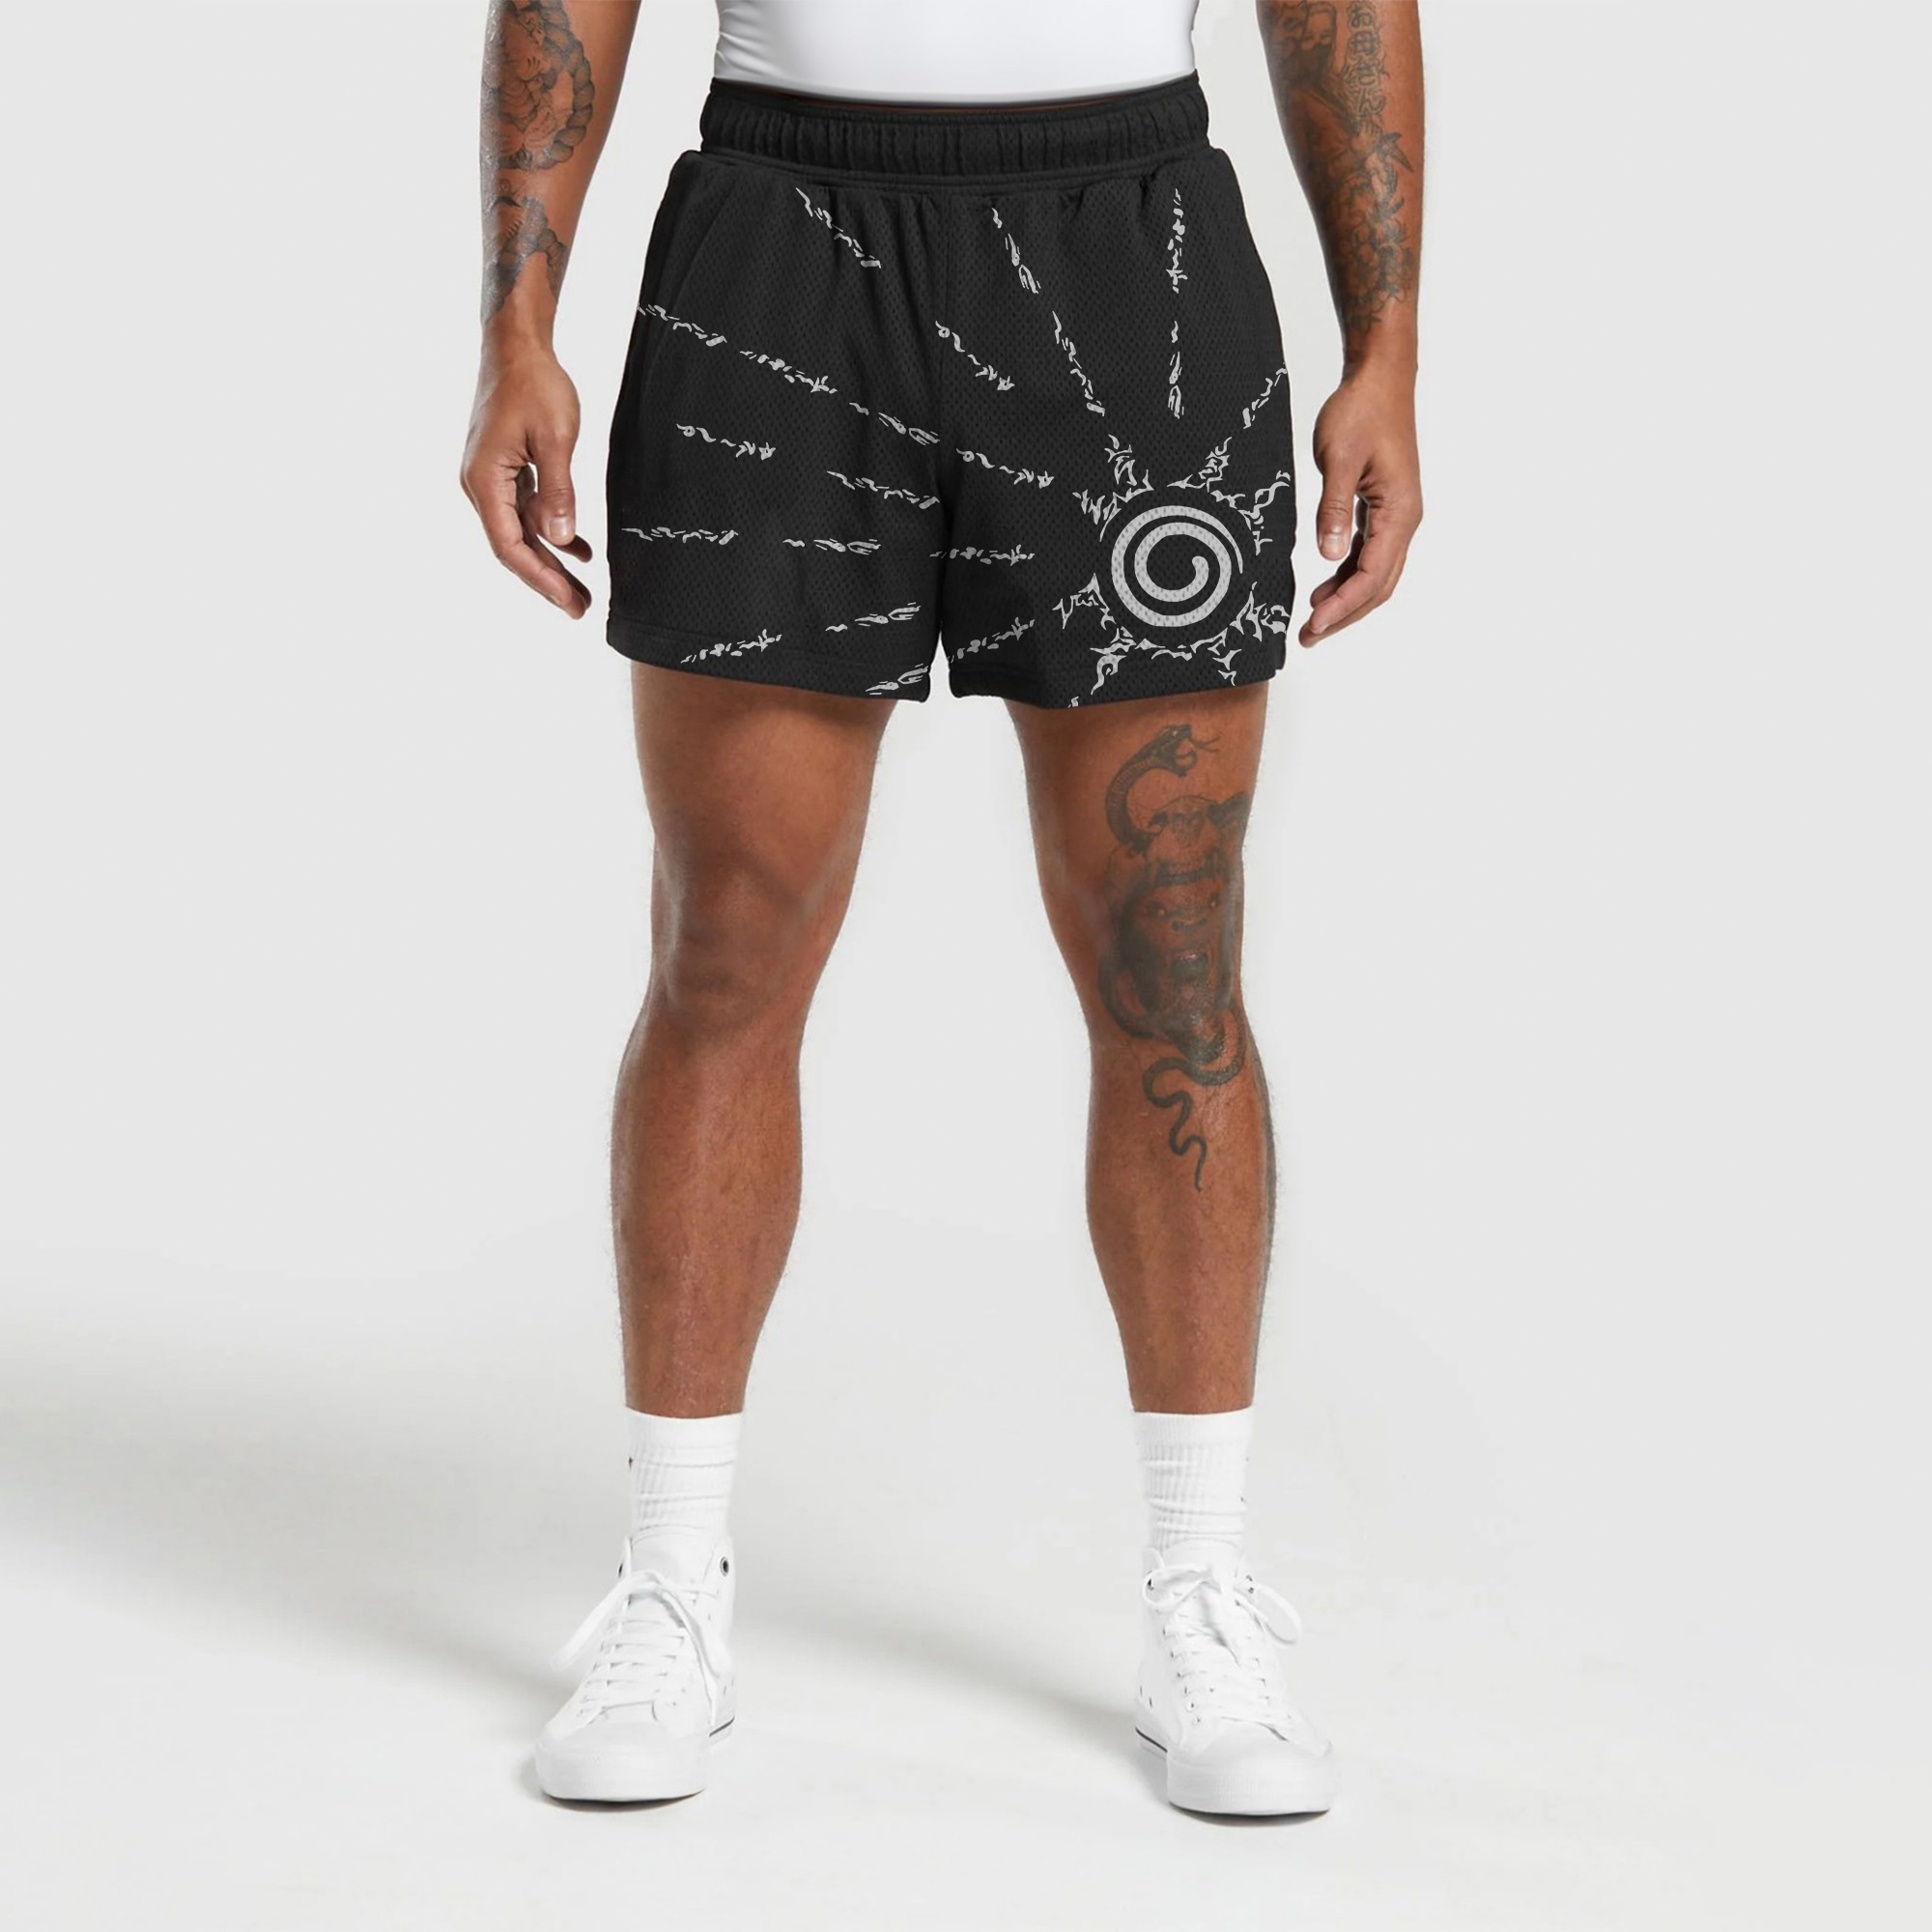 All-Over Print Men's Basketball Shorts Fast Drying